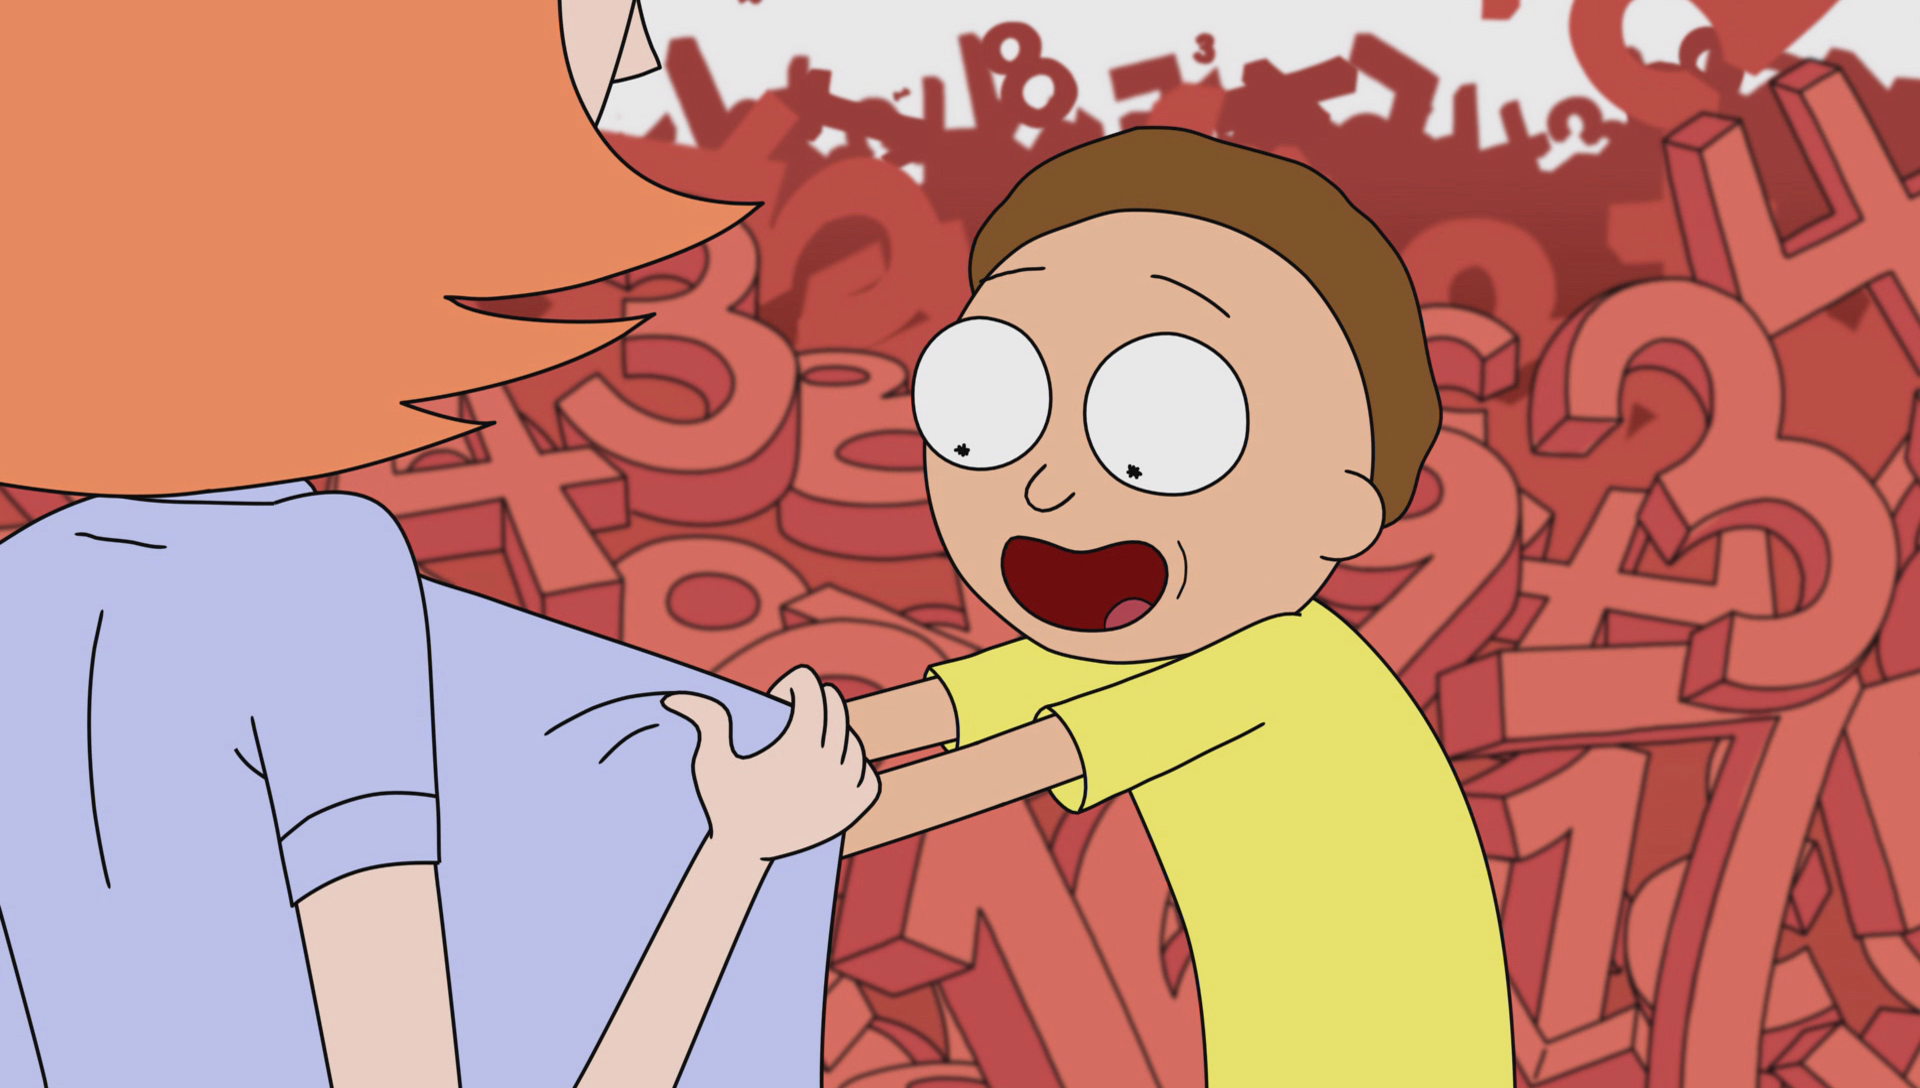 image-s1e1-happy-morty-png-rick-and-morty-wiki-fandom-powered-by-wikia